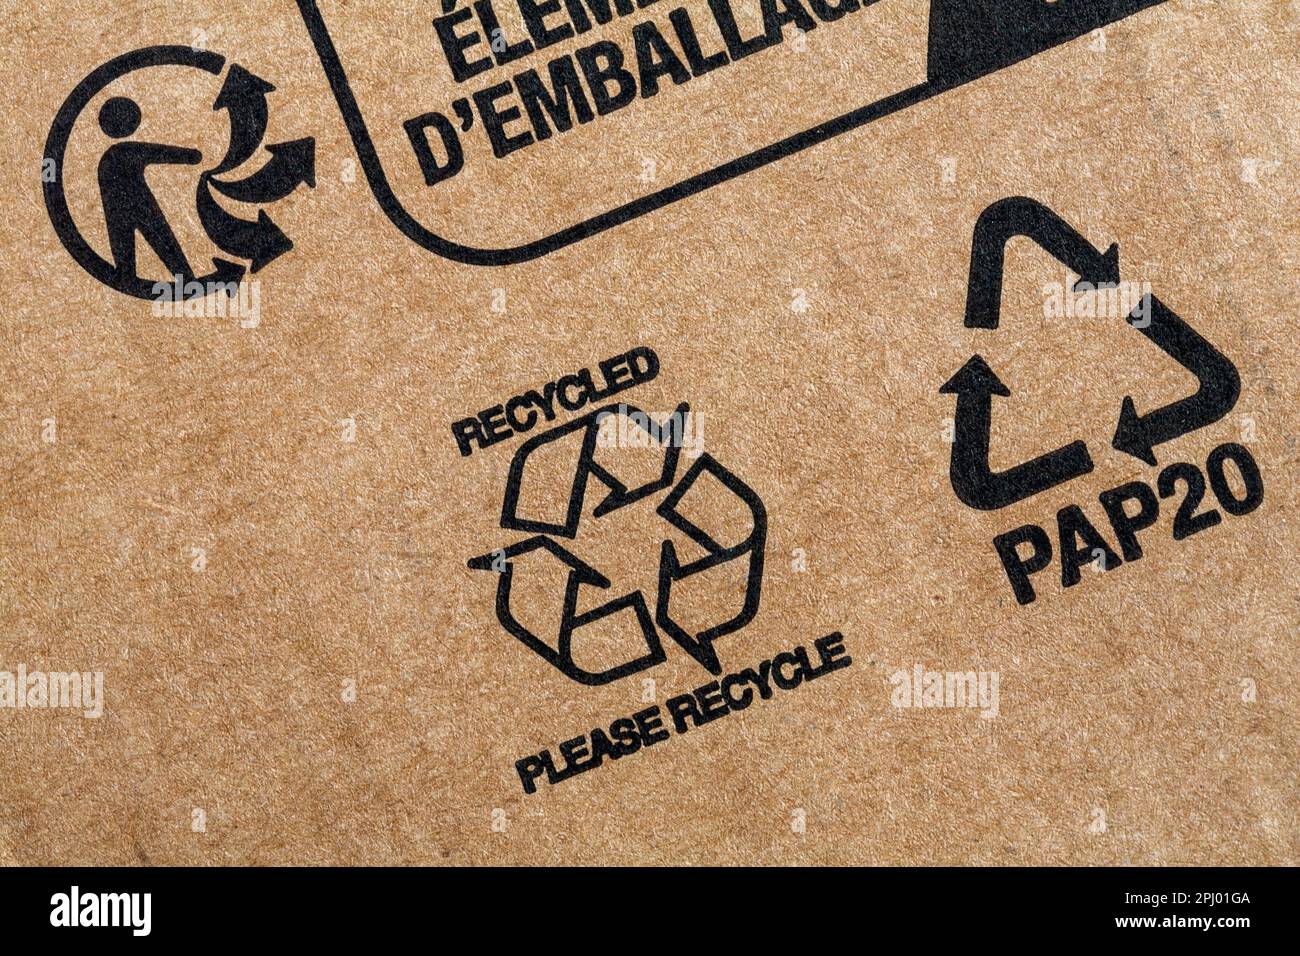 recycled please recycle  PAP 20 PAP20 information on brown cardboard packaging from Amazon - disposal recycling recycle logo symbol Stock Photo